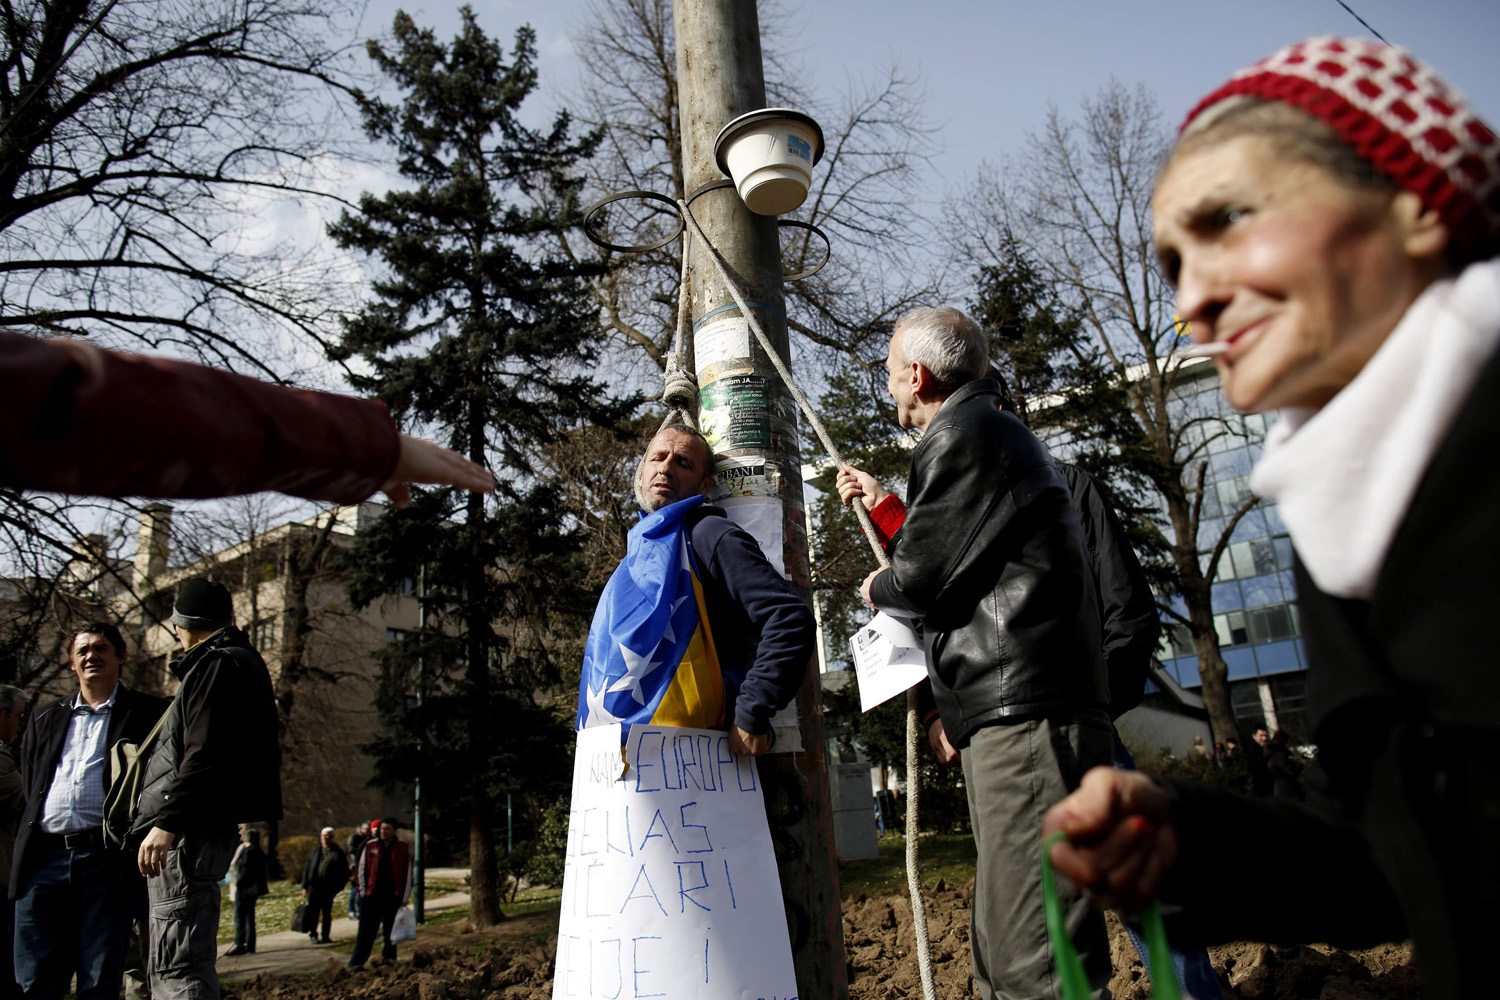 Anti-government protesters simulate an execution scene during a protest in Sarajevo